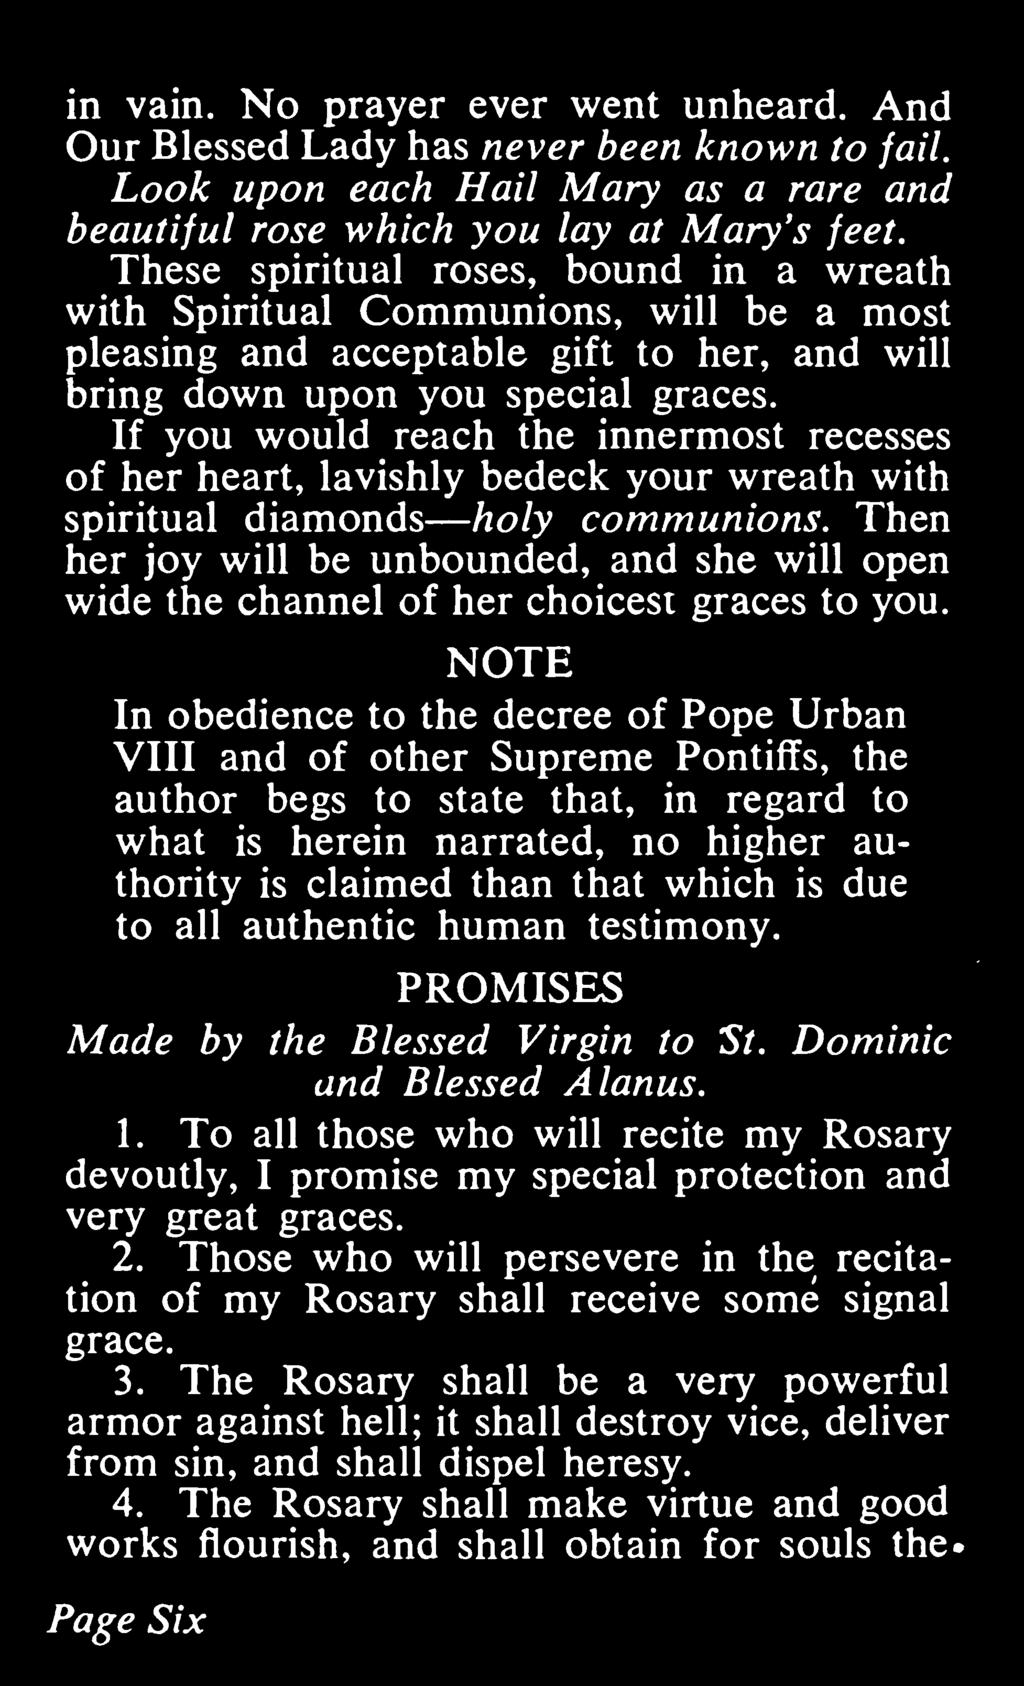 NOTE In obedience to the decree of Pope Urban VIII and of other Supreme Pontiffs, the author begs to state that, in regard to what is herein narrated, no higher authority is claimed than that which